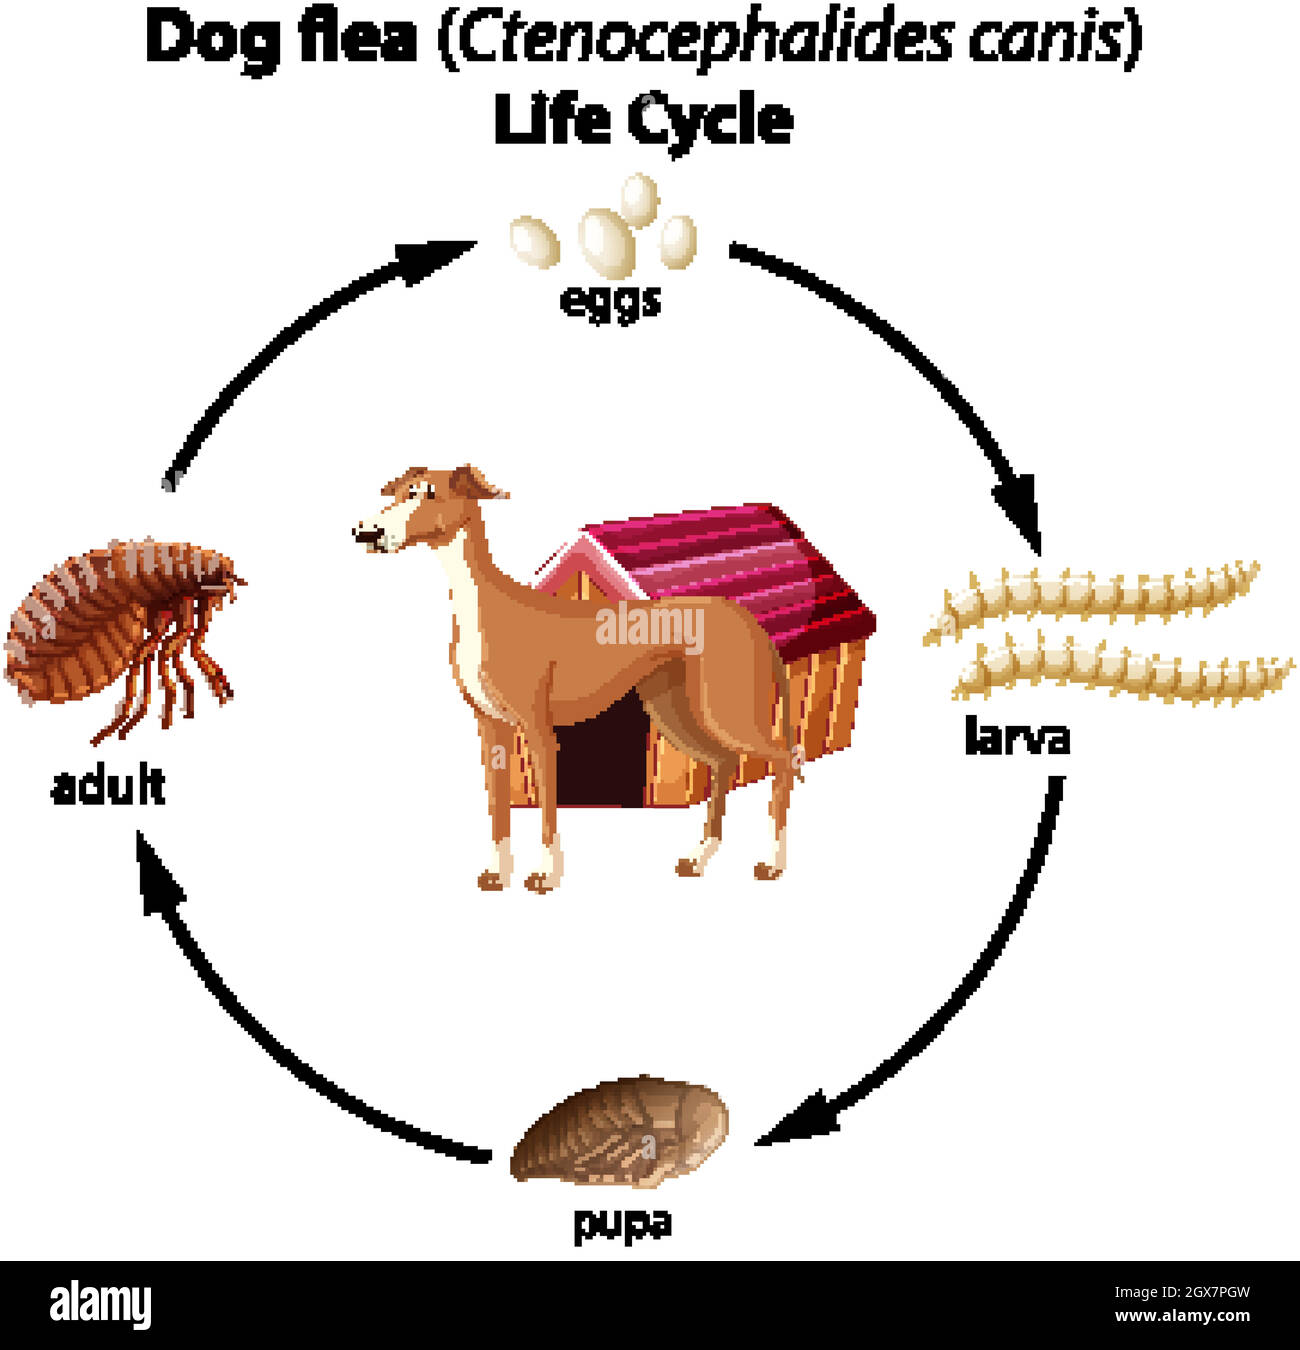 Dog flea life cycle on white background Stock Vector